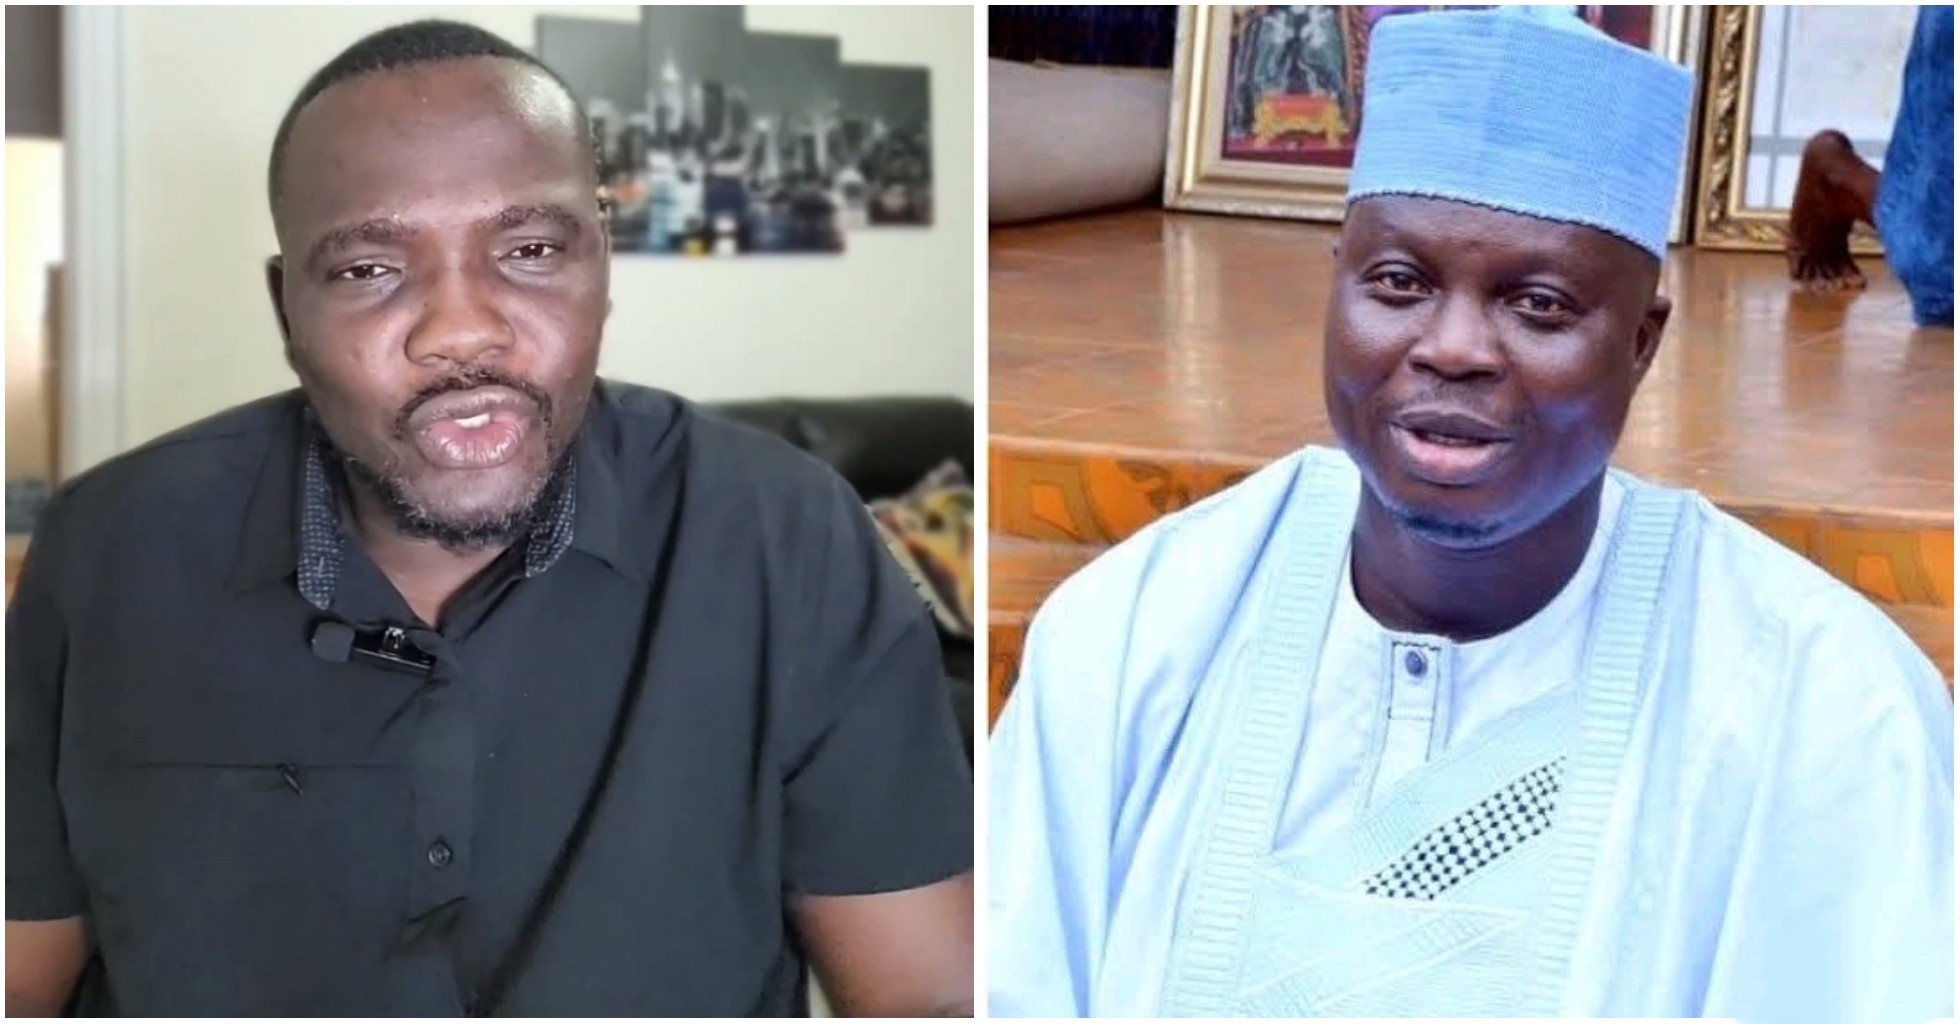 “You made a grave mistake with your statement” - Yomi Fabiyi calls out TAMPAN president Mr Latin